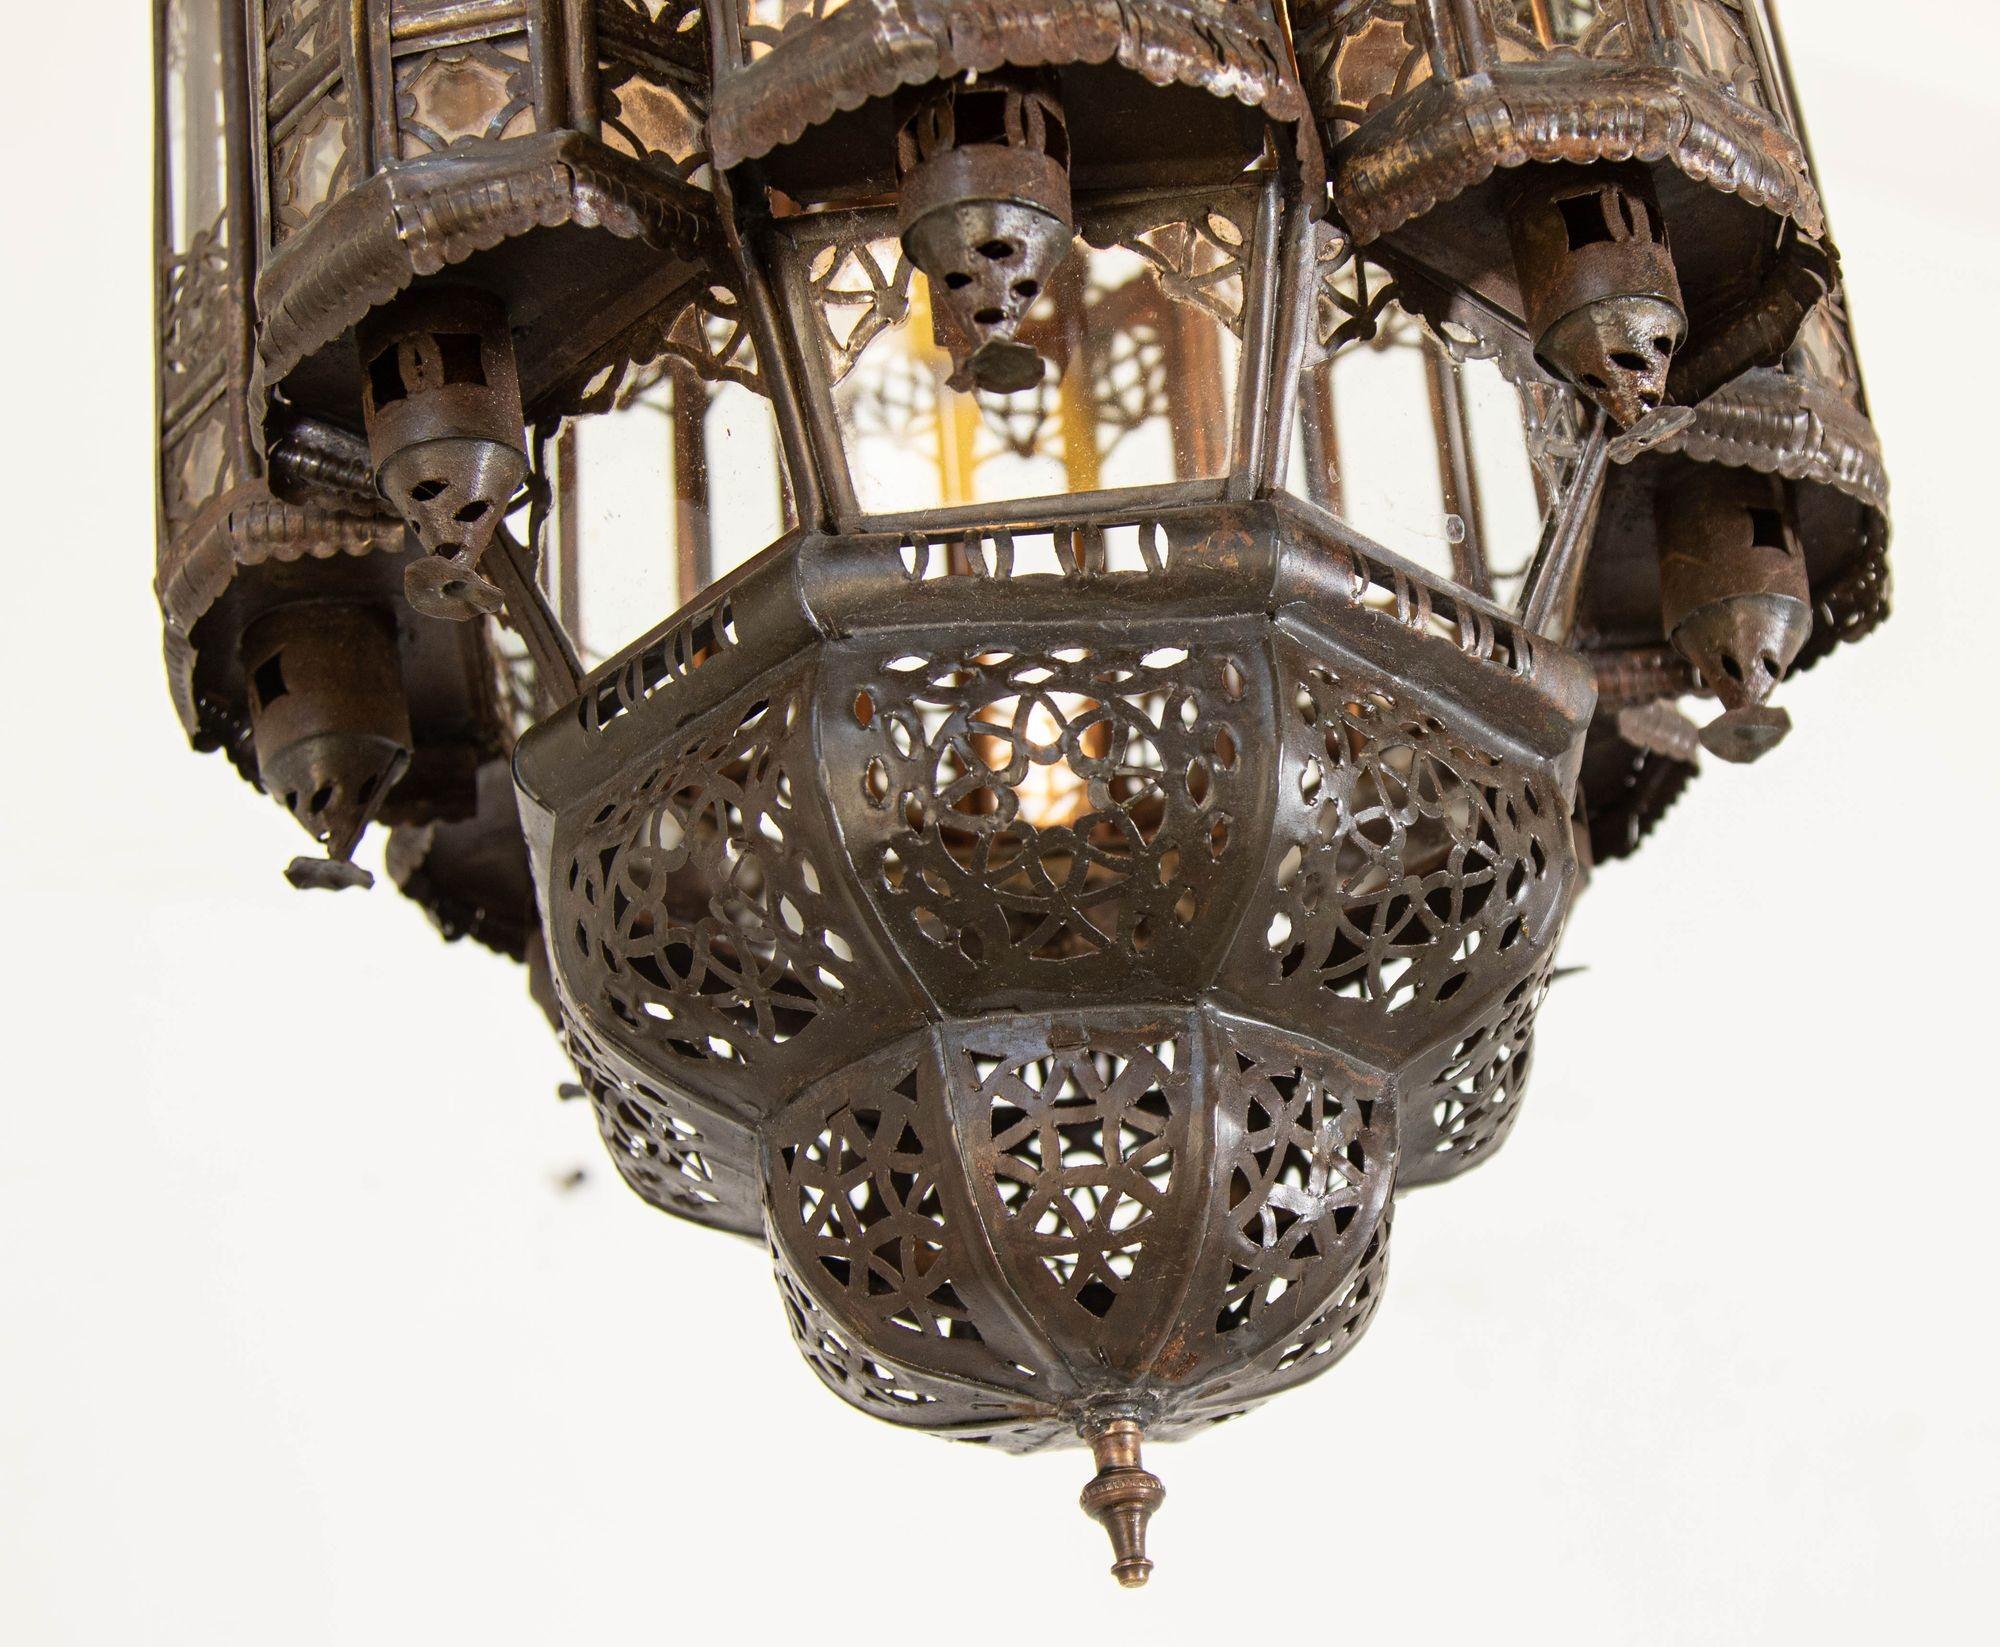 Vintage Moroccan Lantern Mamounia Clear Glass Hand-Crafted Ceiling Light Fixture For Sale 1